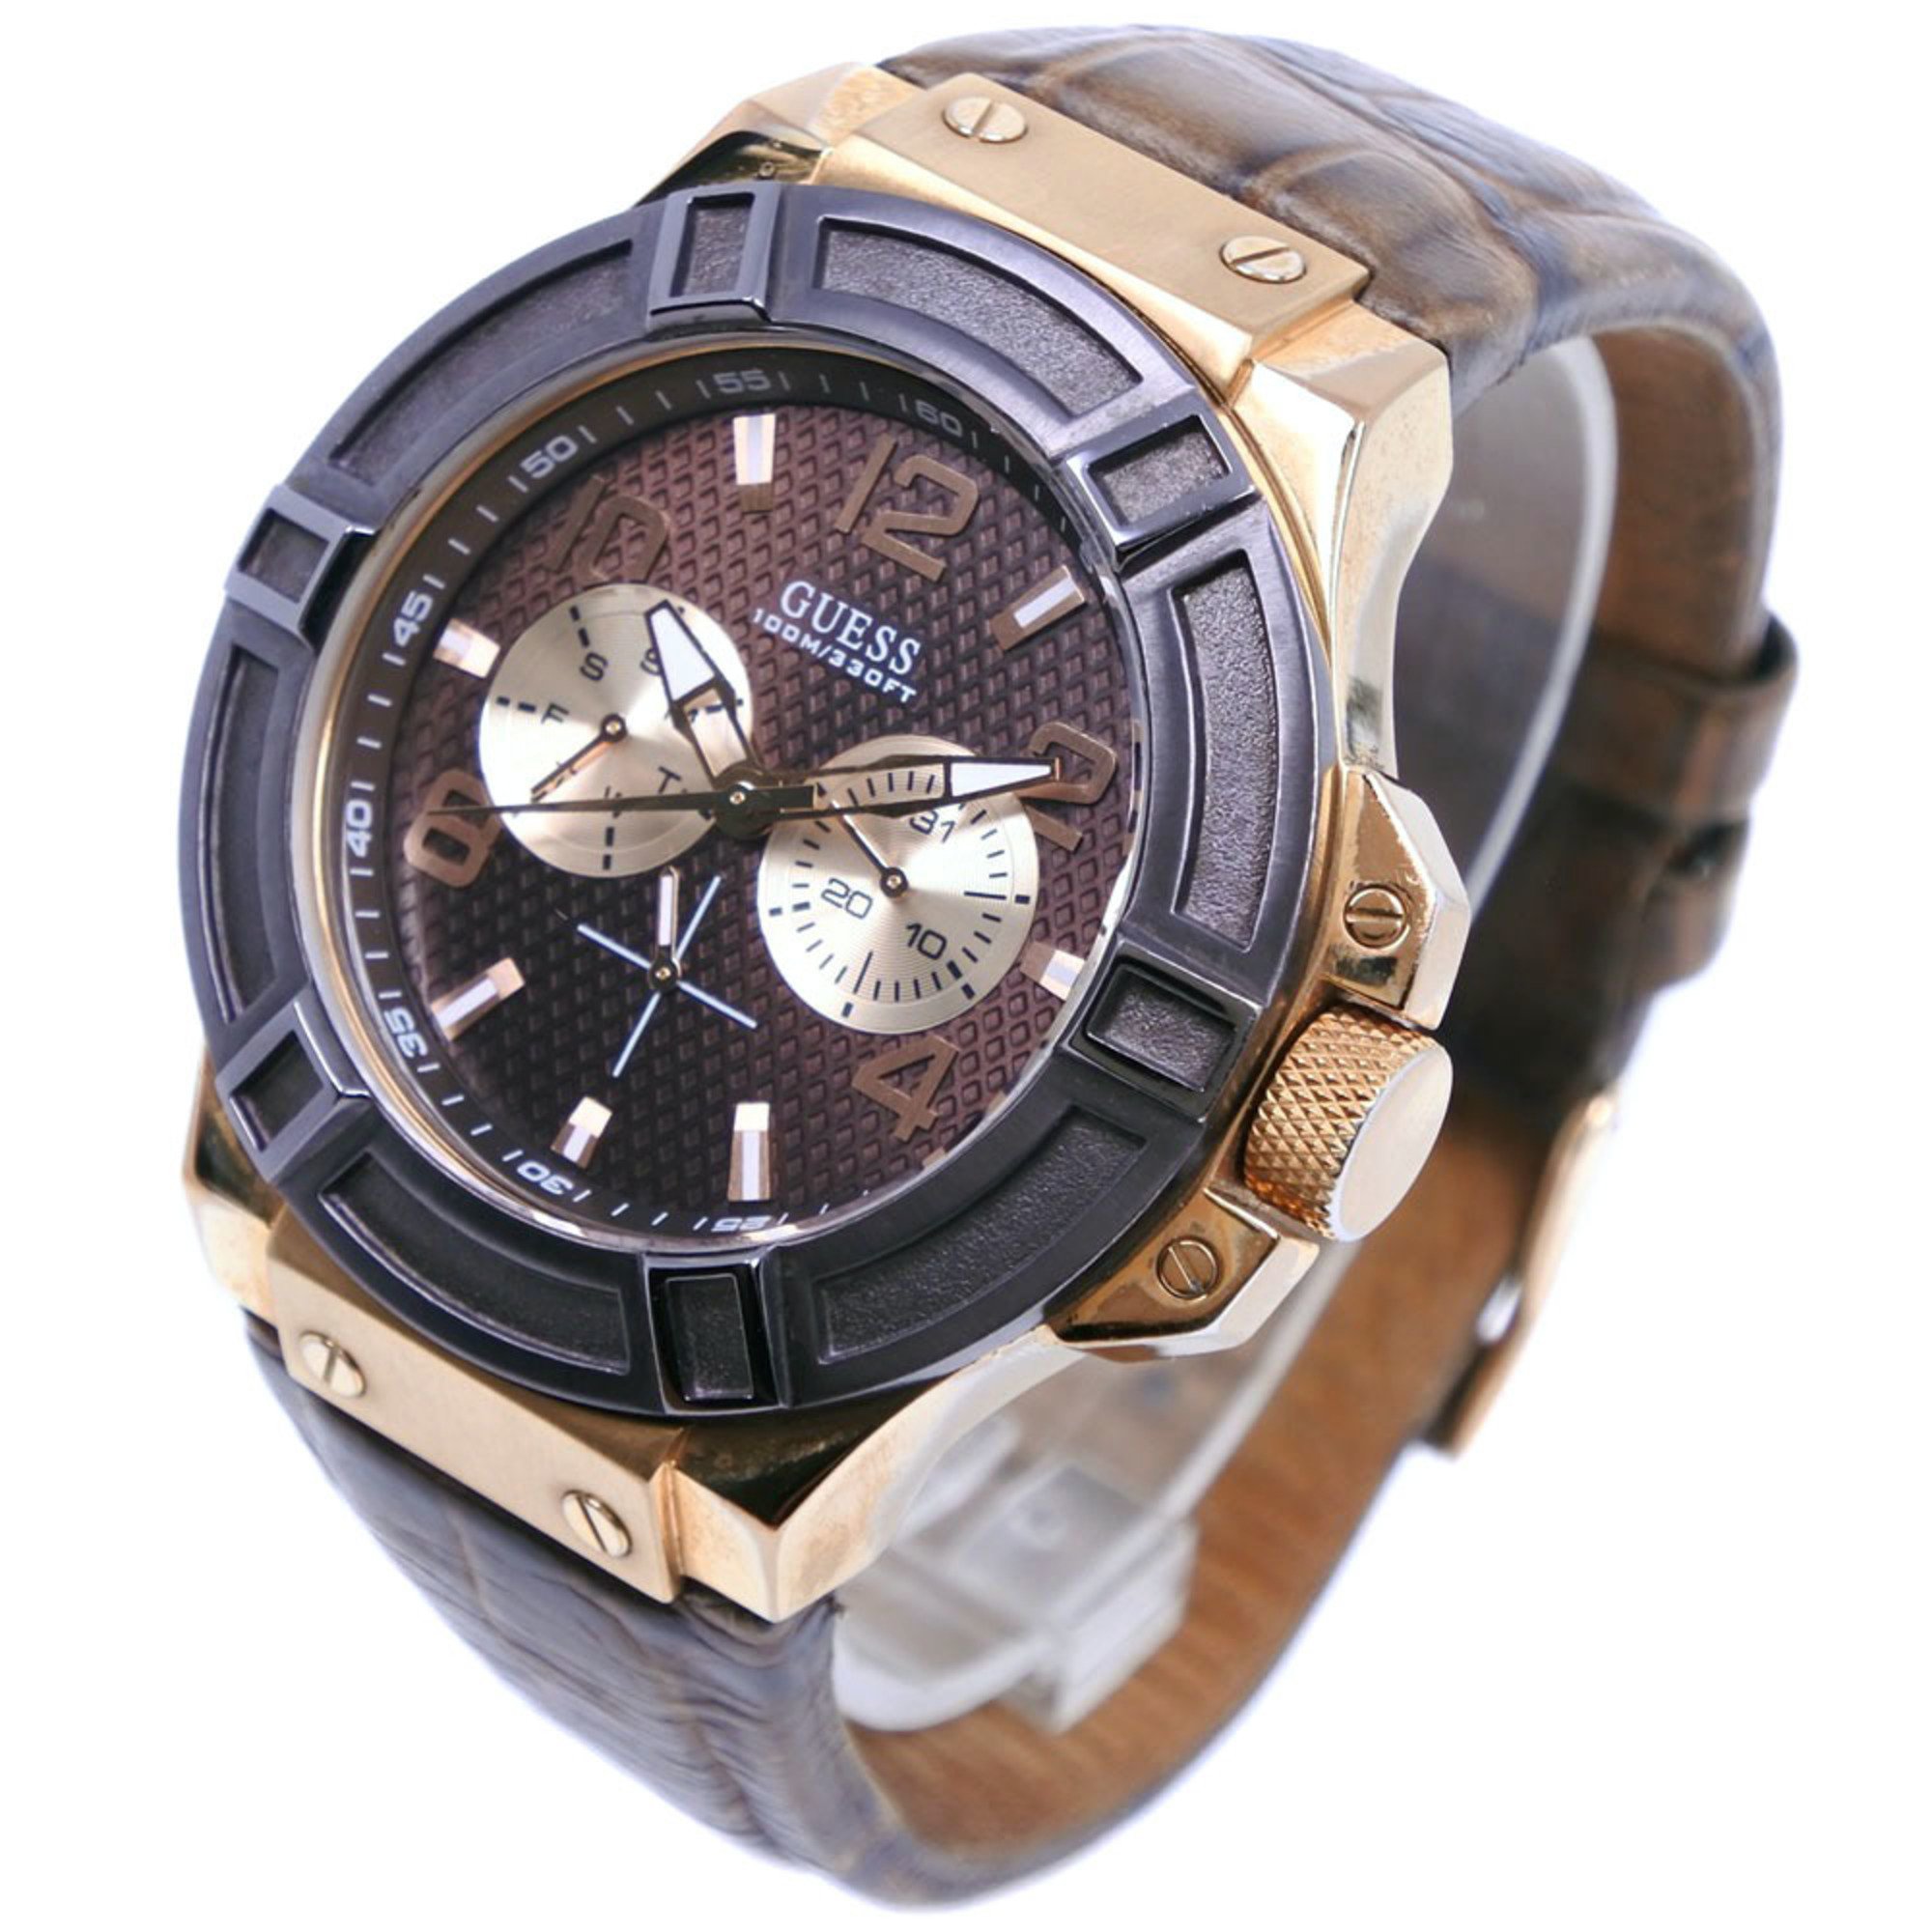 Guess Wristwatch W0040G3 Stainless Steel x Leather Gold Quartz Analog Display Brown Dial Men's